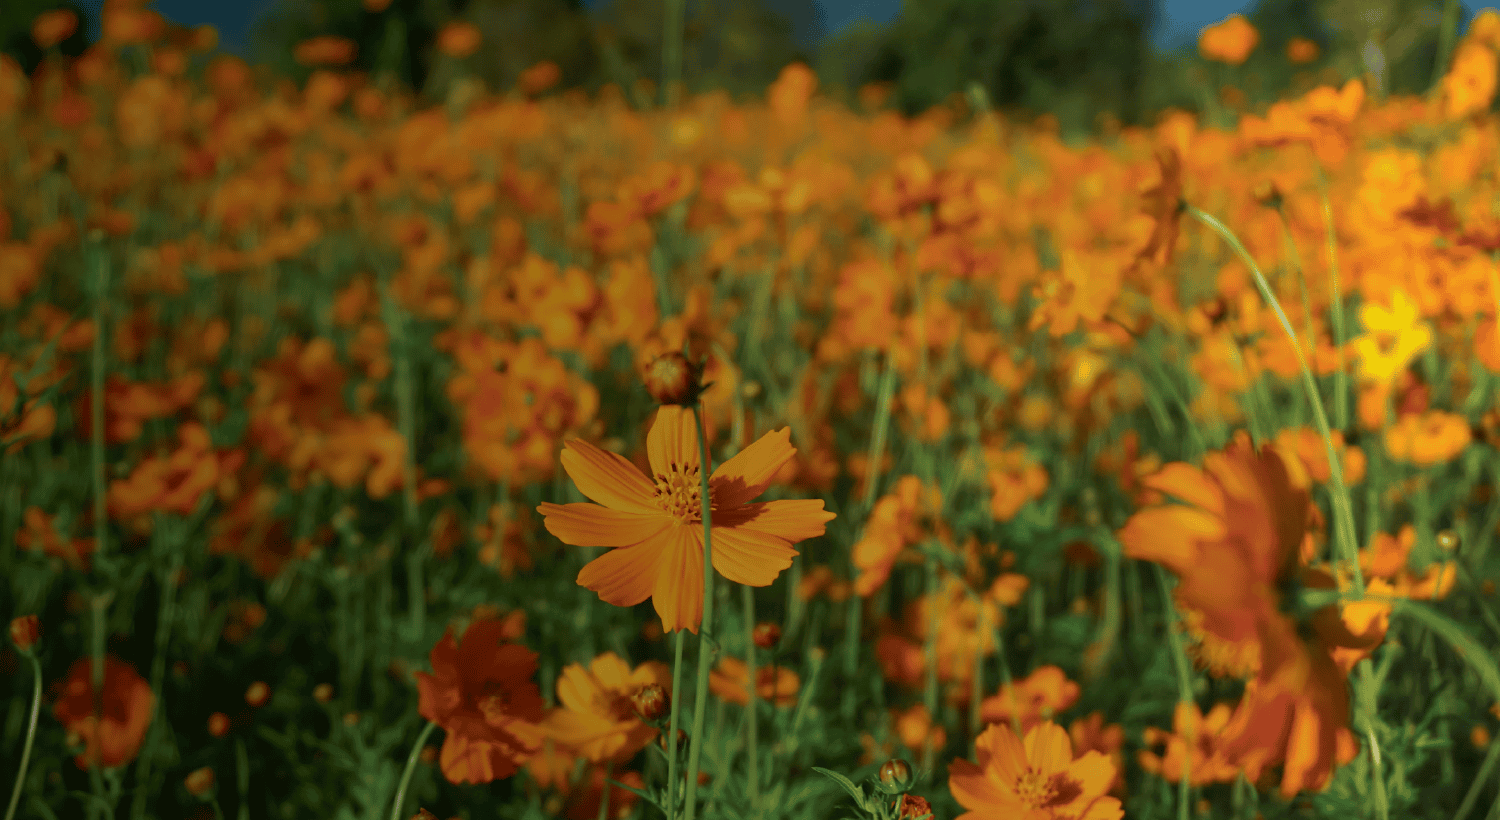 Background image of flowers in a field